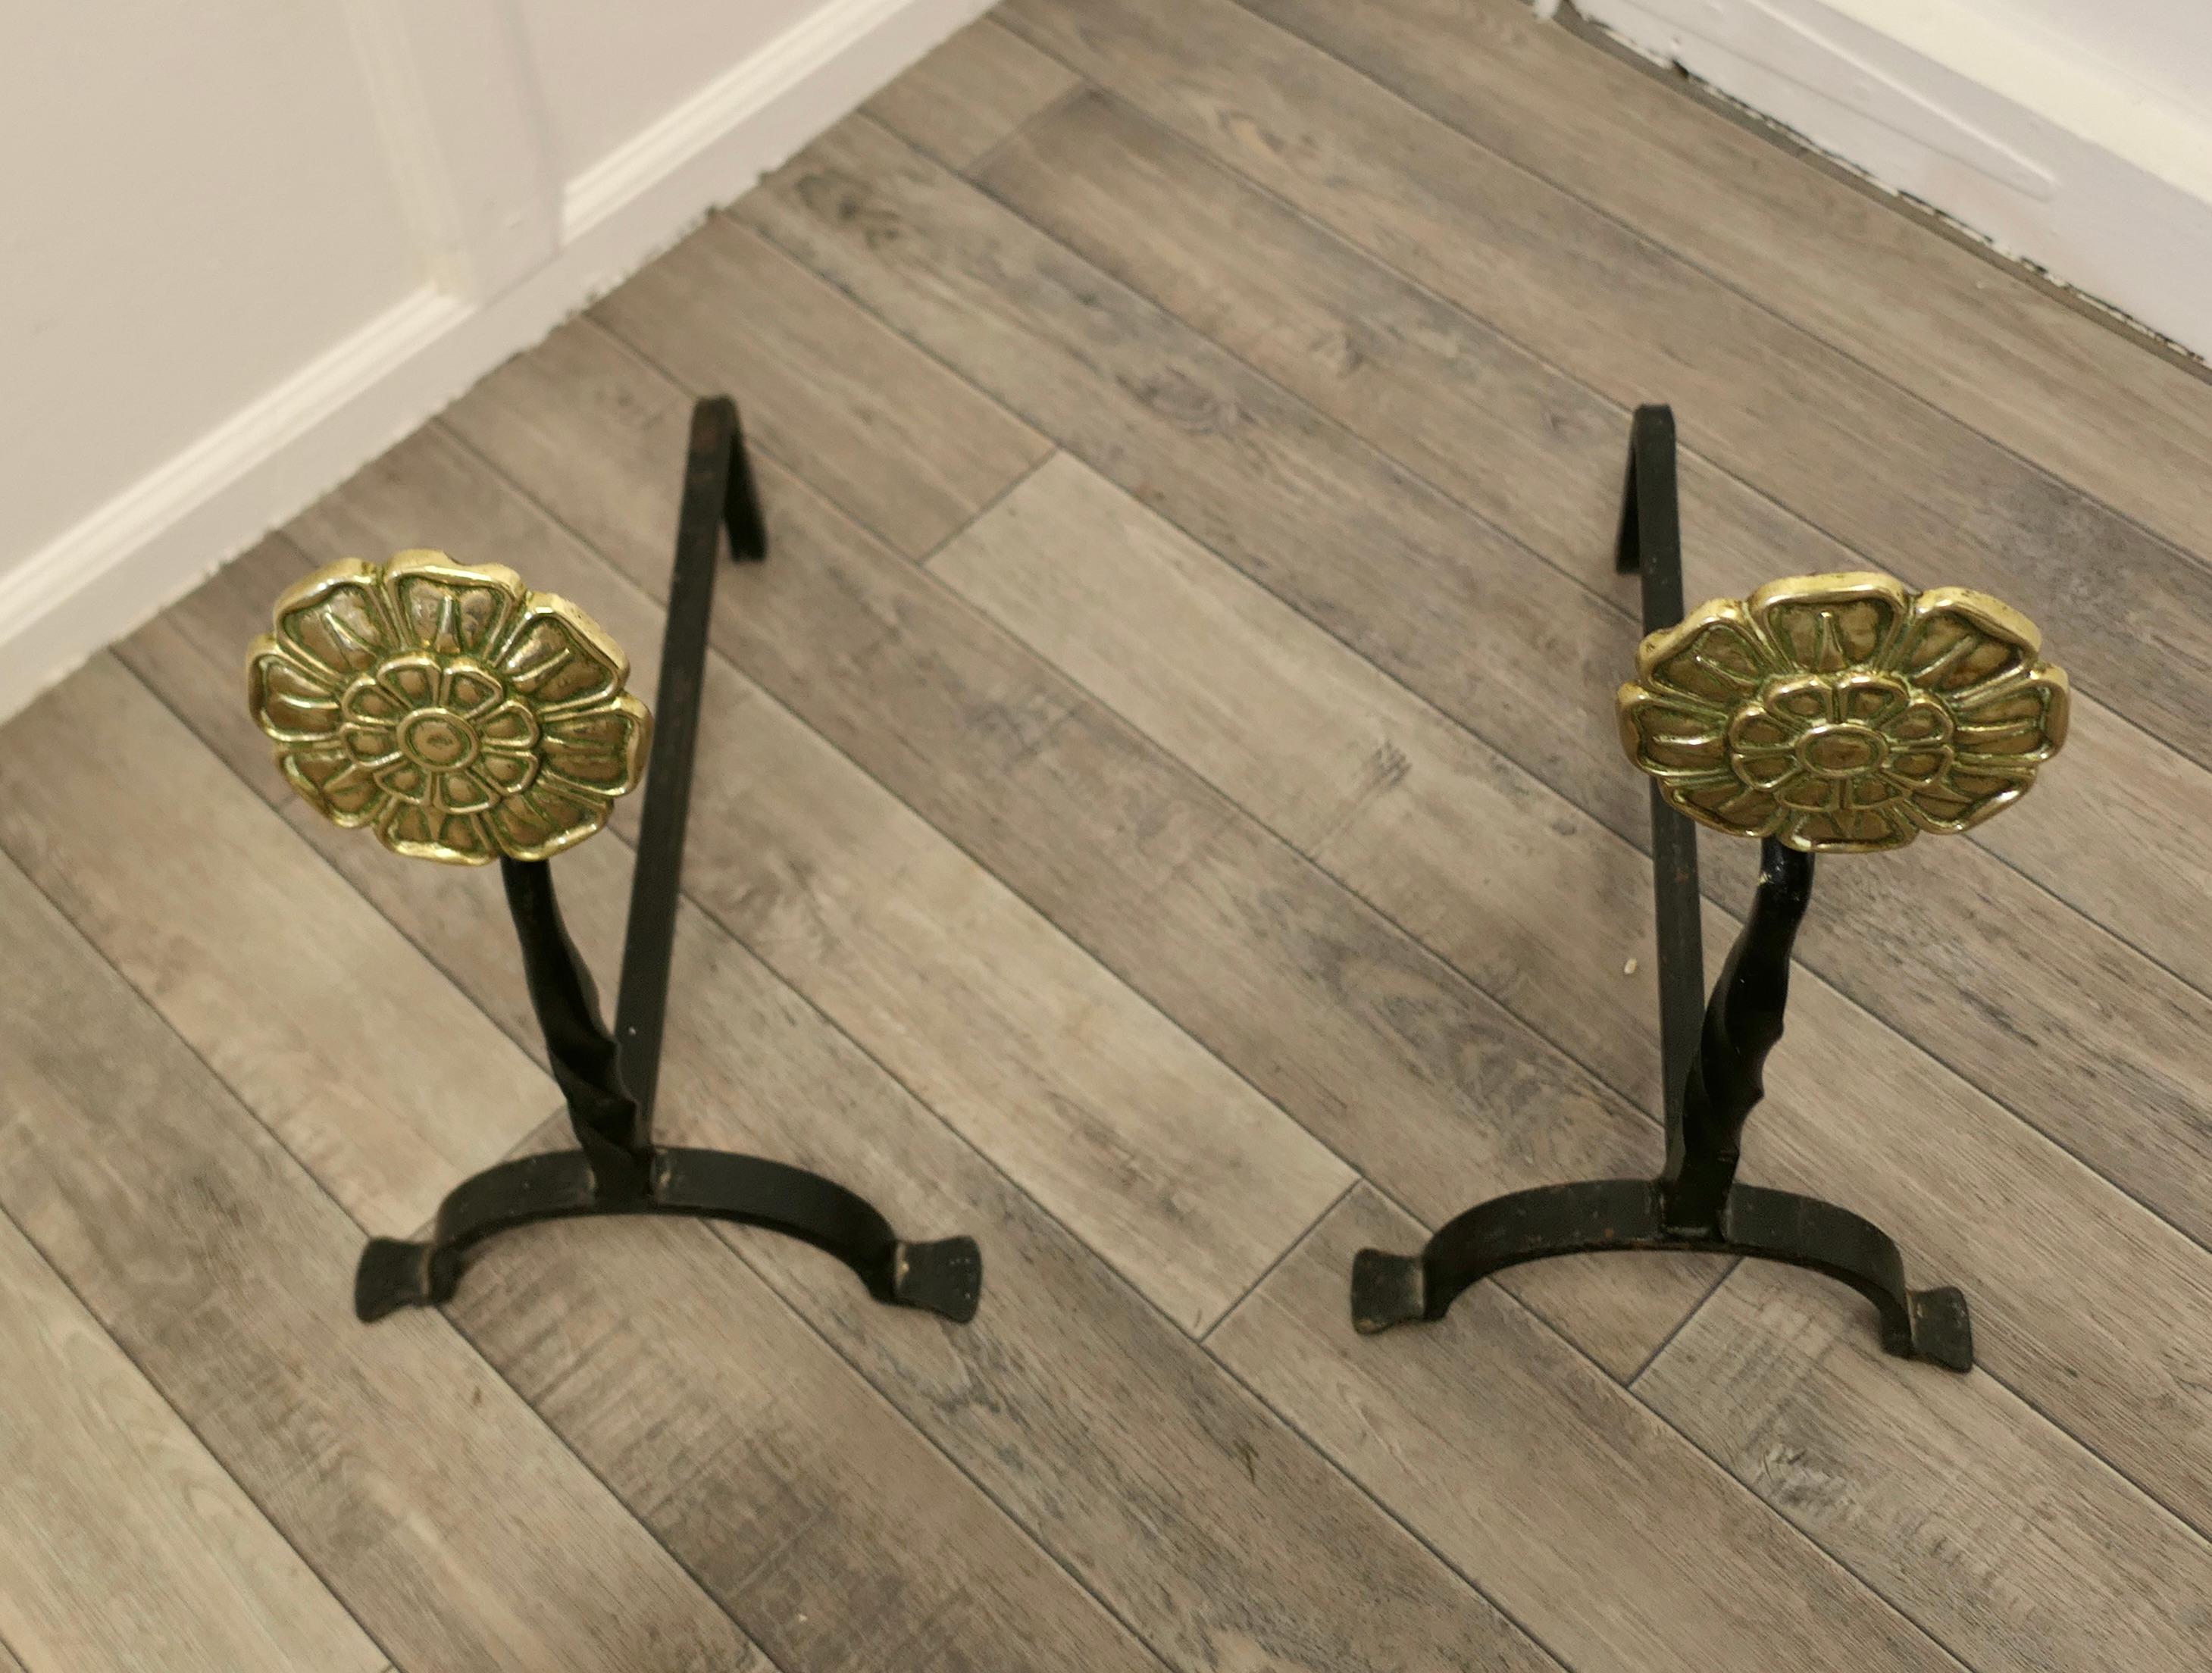 An Elegant pair of Tudor Rose brass & iron Andirons or Fire Dogs

This is a tall elegant pair of Andirons and they are made of iron with a large roundels in the shape of a 5” Tudor Rose on the top
The Andirons are 20” high, 16” long and are 9.5”